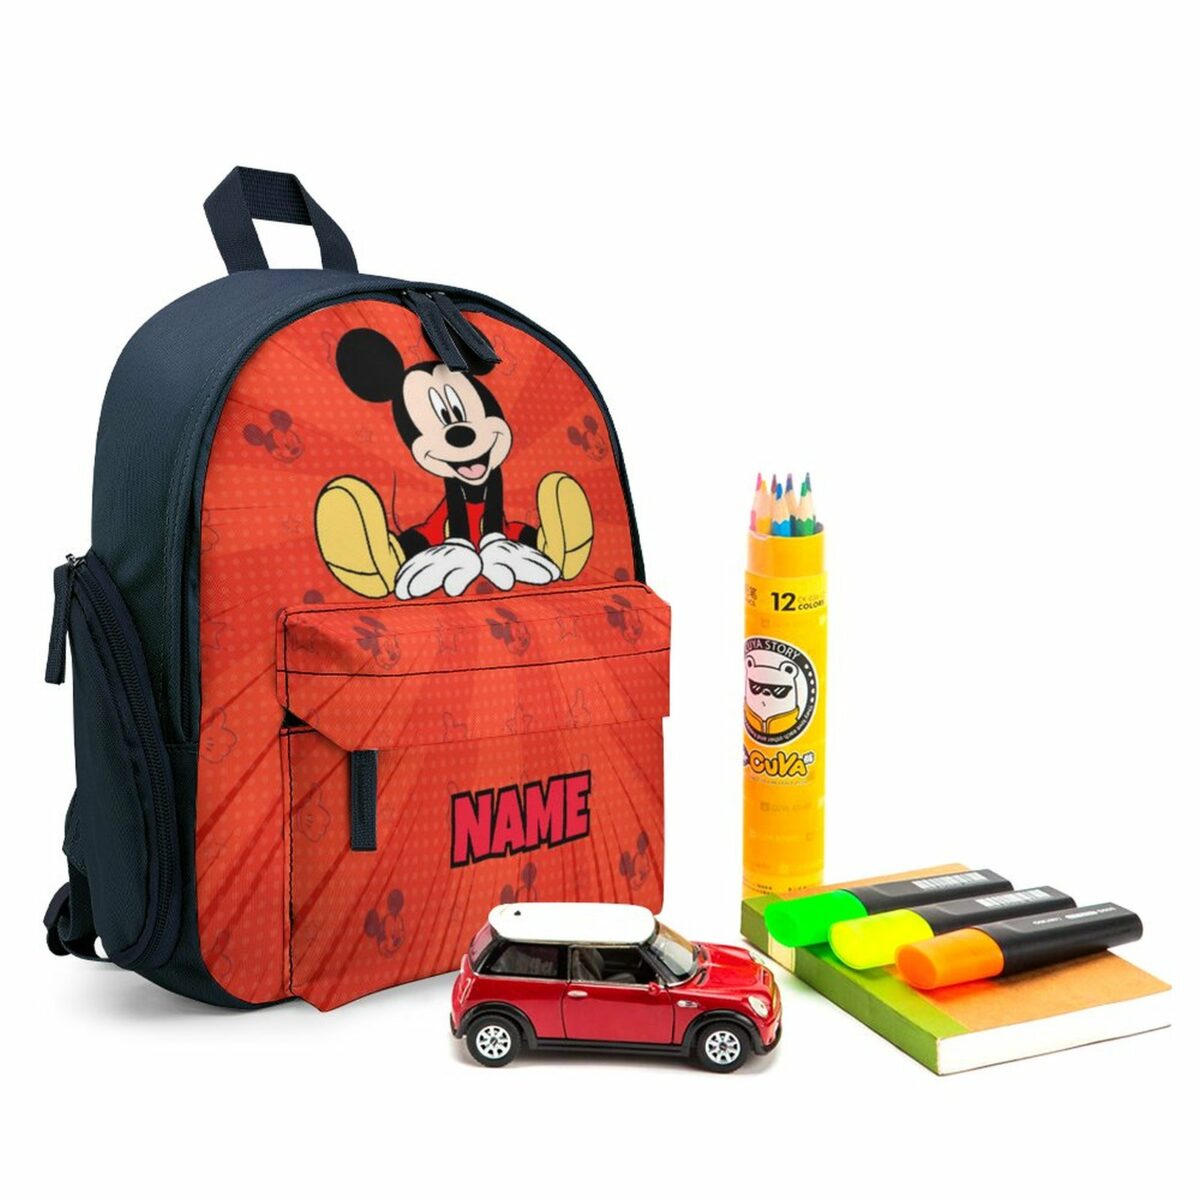 Personalized Mickey Mouse Blue and Orange Children’s School Bag – Toddler’s Backpack Cool Kiddo 14